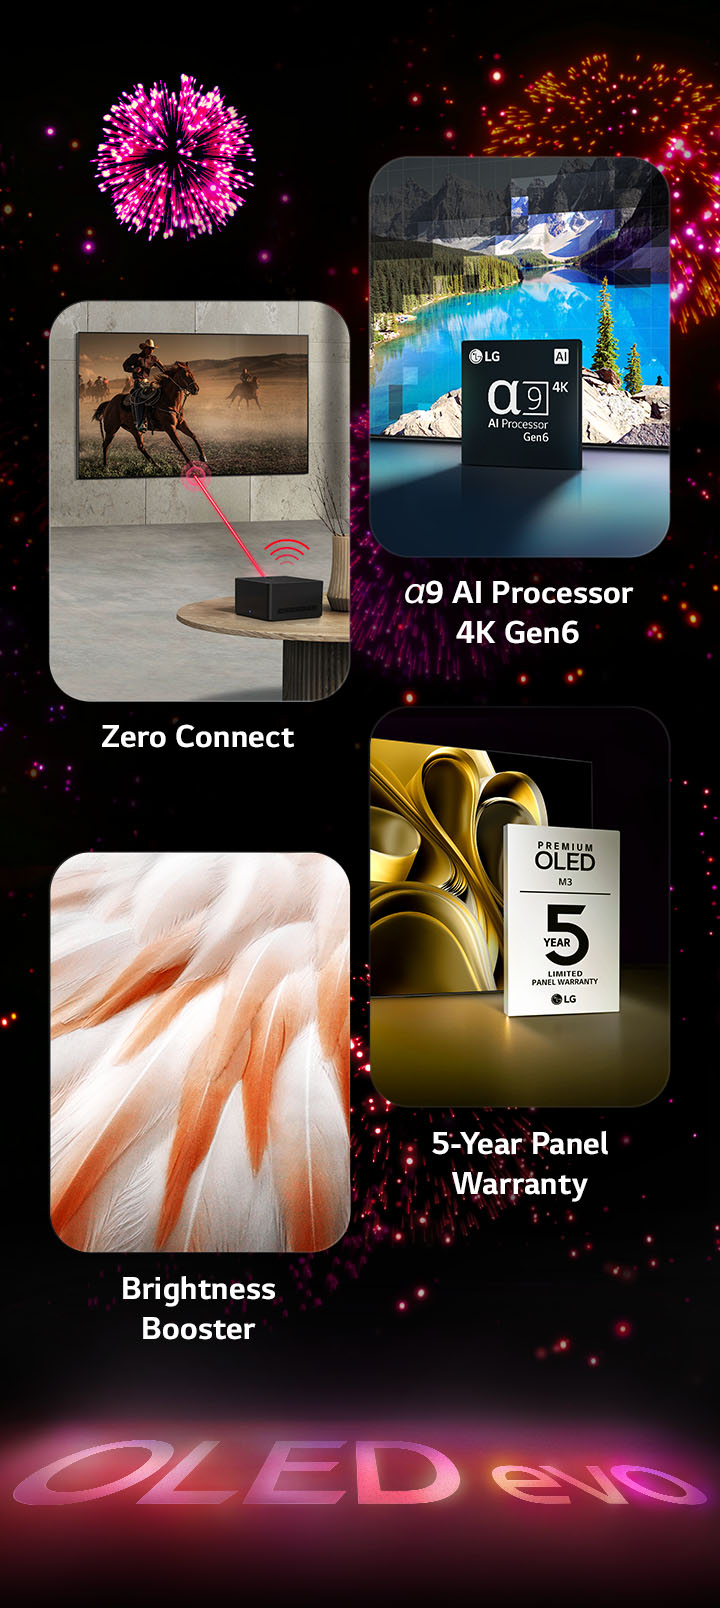 An image presenting the key features of the LG OLED M3 against a black background with a pink and purple firework display. The pink reflection from the firework display on the ground shows the words "OLED." Within the picture, an image depicting Zero Connect shows OLED M3 on the wall of a gray room with the Zero Connect Box wirelessly transmitting the picture. An image depicting the α9 AI Processor 4K Gen6 shows the chip standing before a picture of a lake scene being remastered with the processing technology. An image presenting Brightness Booster shows bird's feathers with deep contrast and bright whites. An image presenting the 5-Year Panel Warranty shows the Premium OLED M3 warranty logo with the display in the backdrop. 